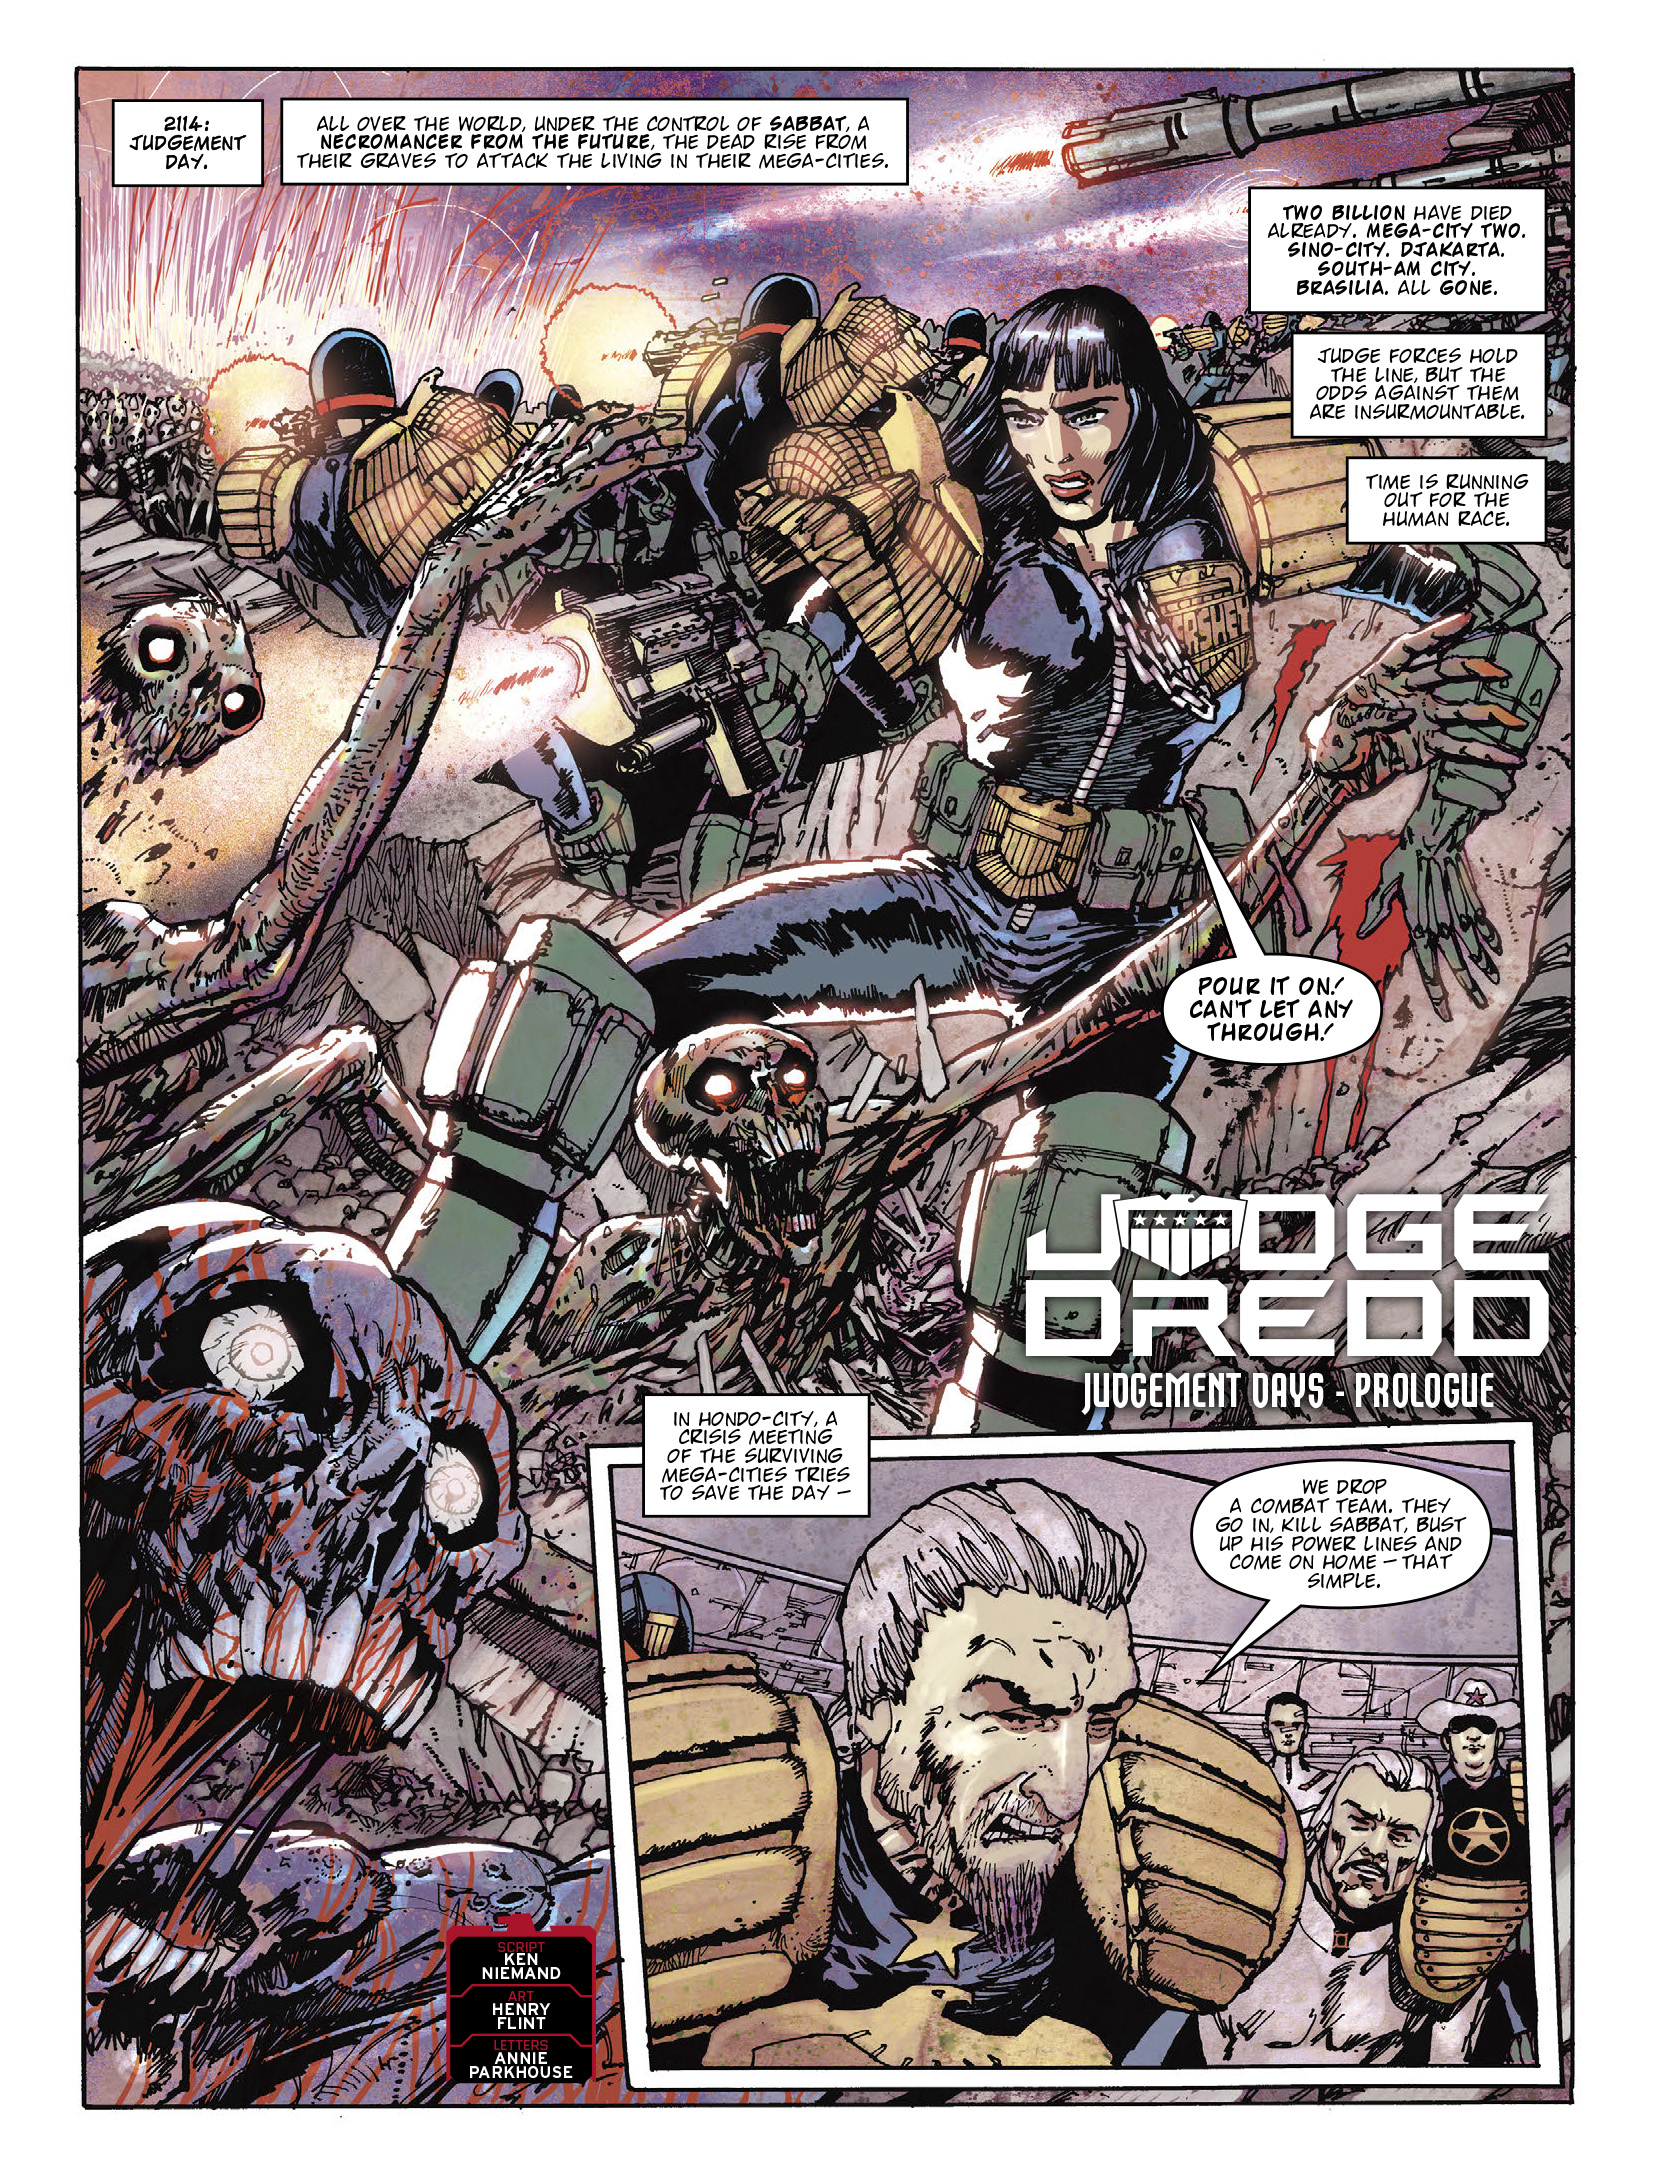 2000 AD: Chapter 2300 - Page 3